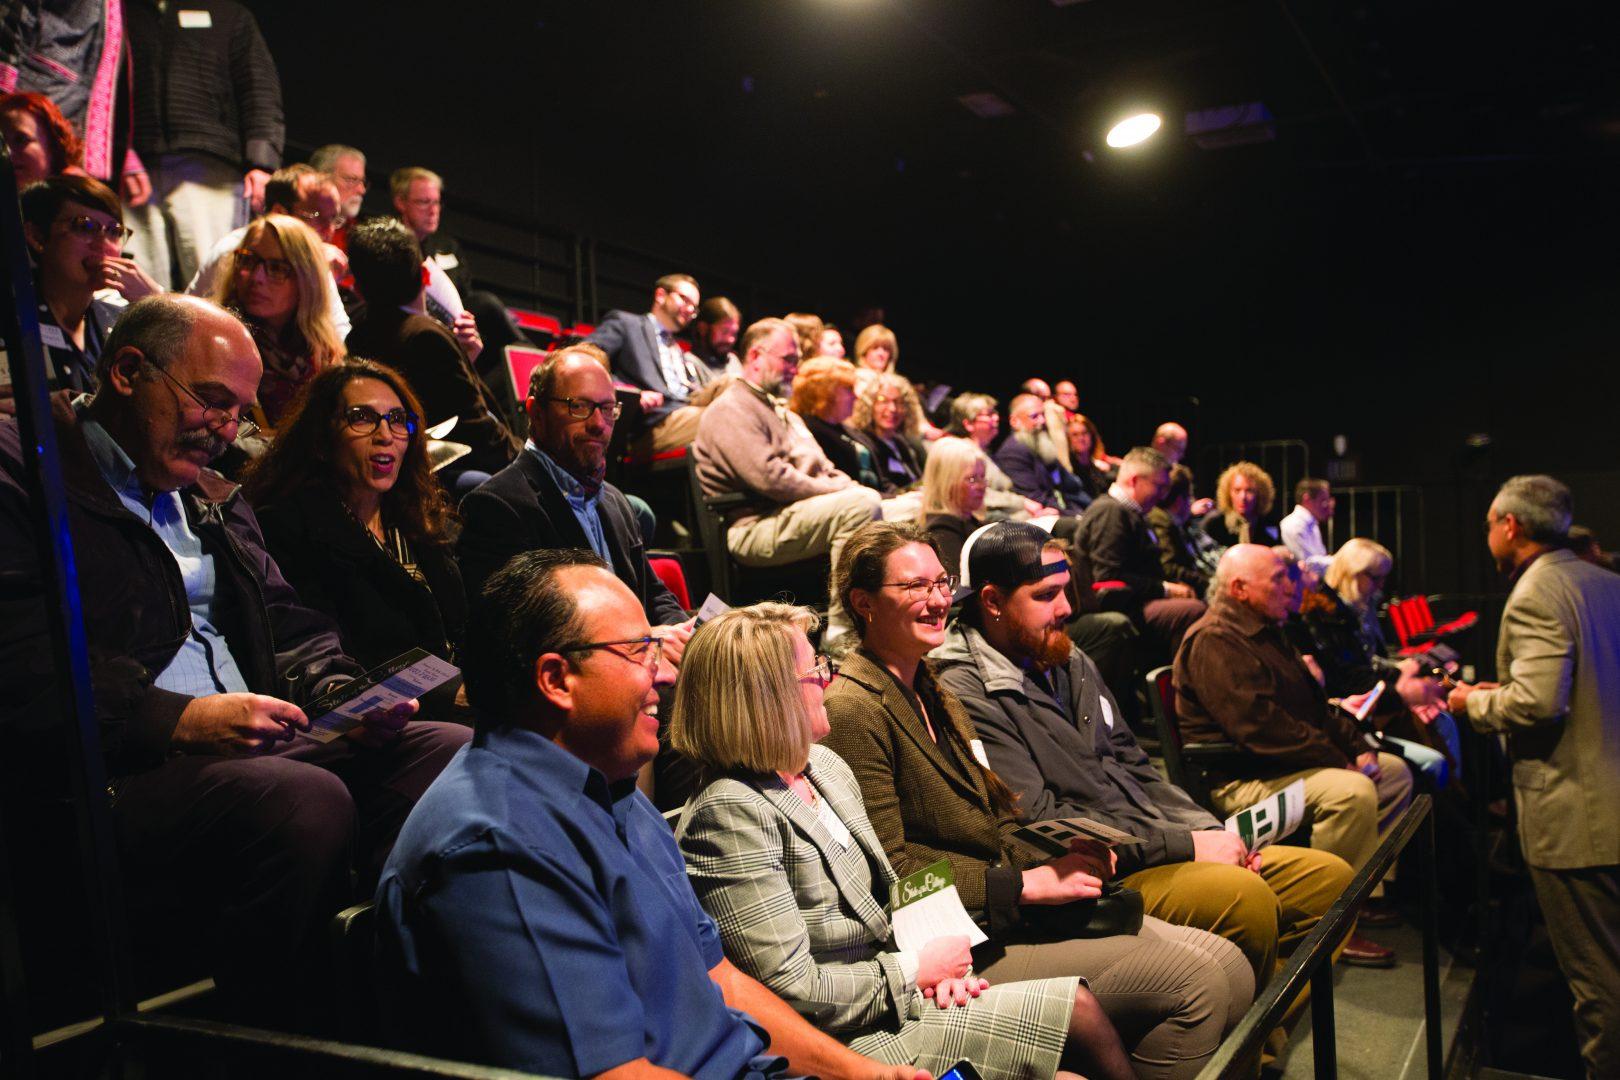 Members of the Arts and Humanities advisory board along with faculty, staff and supporters of the college gathered at the State of the College of Arts and Humanities event at the Dennis and Cheryl Woods Theatre on Jan. 18. (Benjamin Cruz/The Collegian)